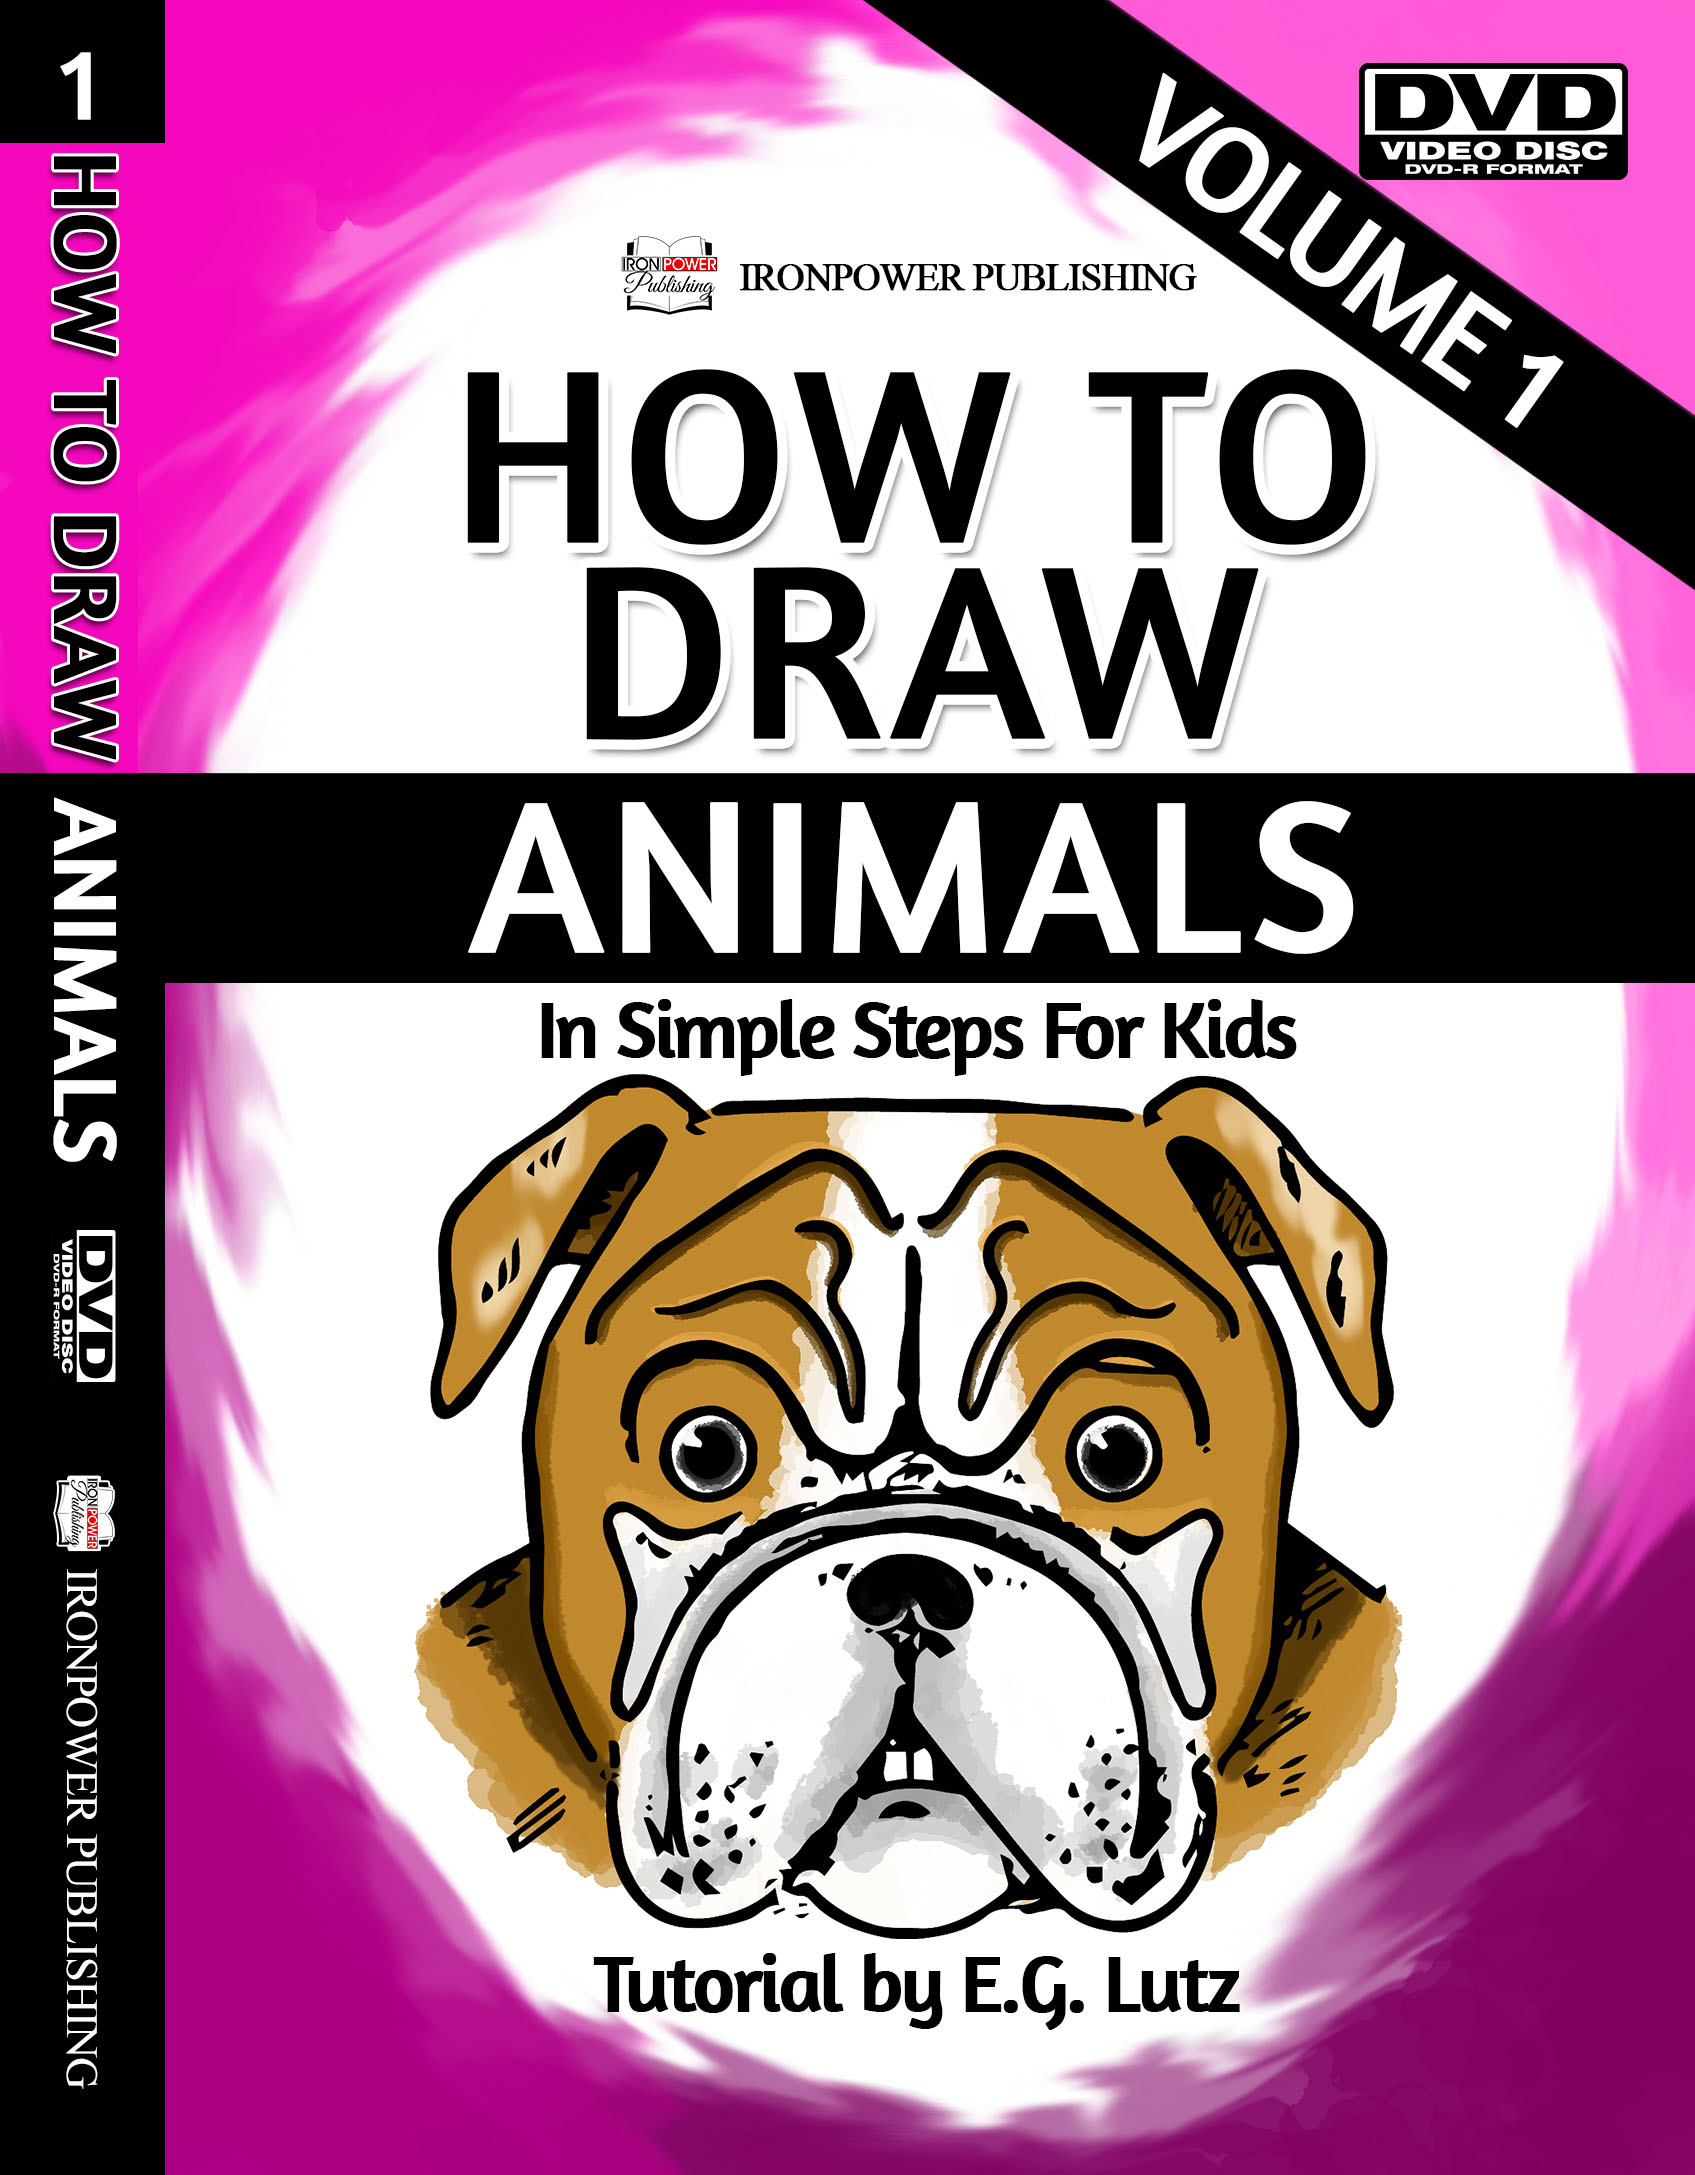 How to Draw Animals (In Simple Steps for Kids) Volume 1 – Ironpower  Publishing